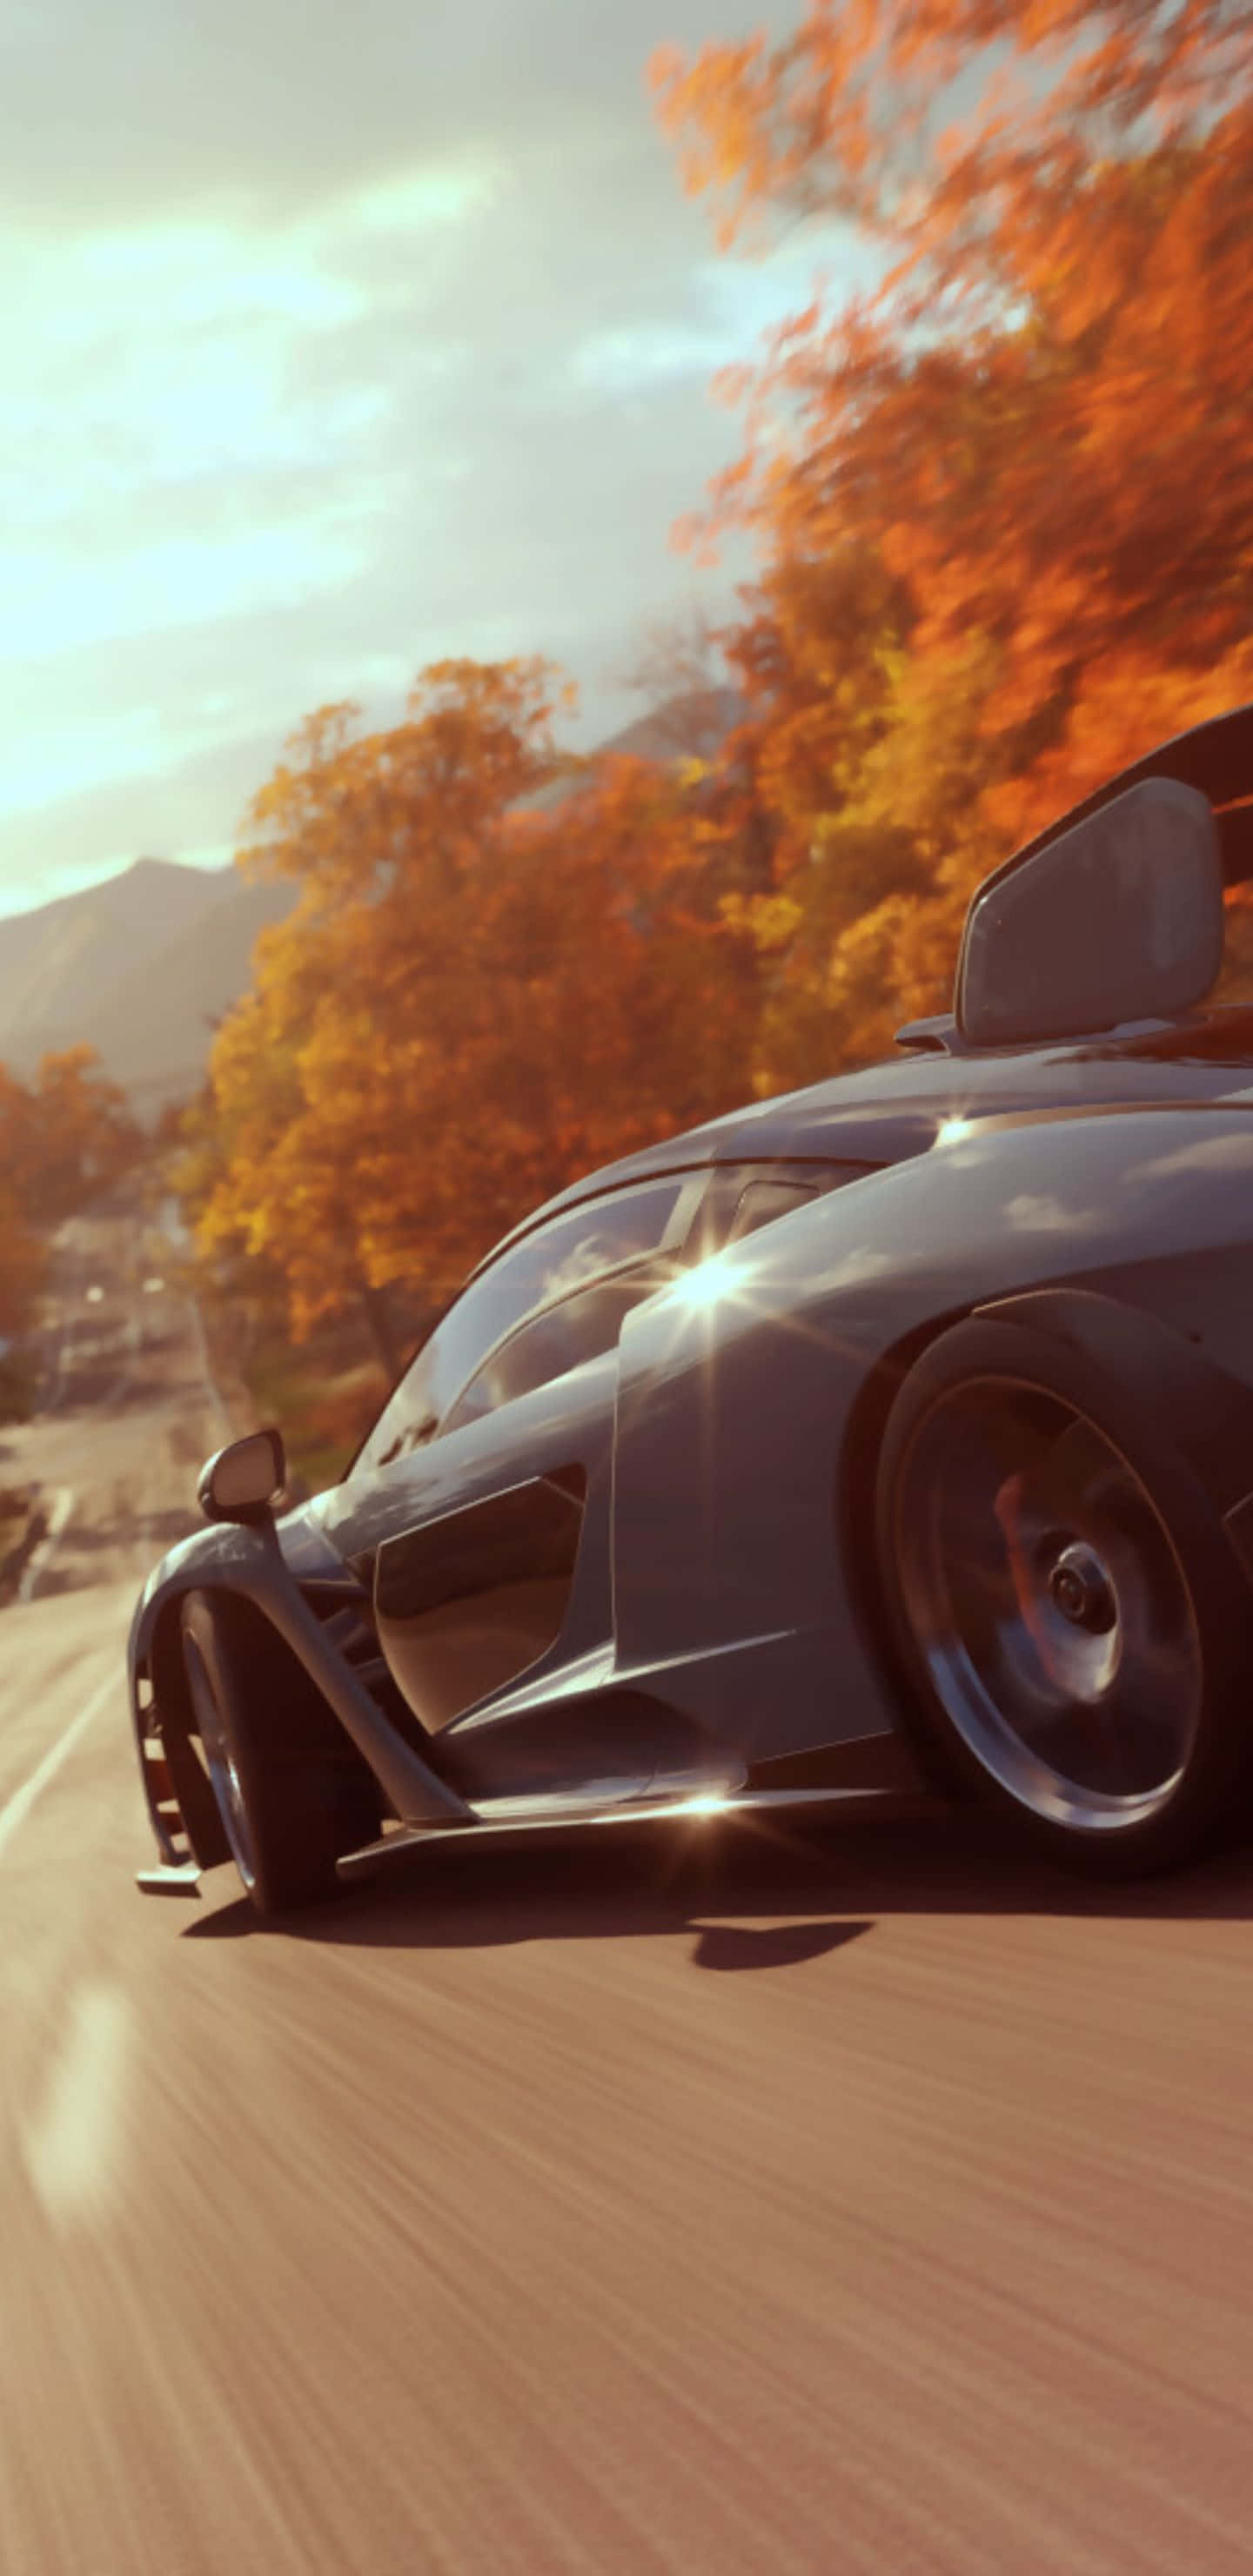 Race to the finish line in Forza Horizon 4 with your Pixel 3XL